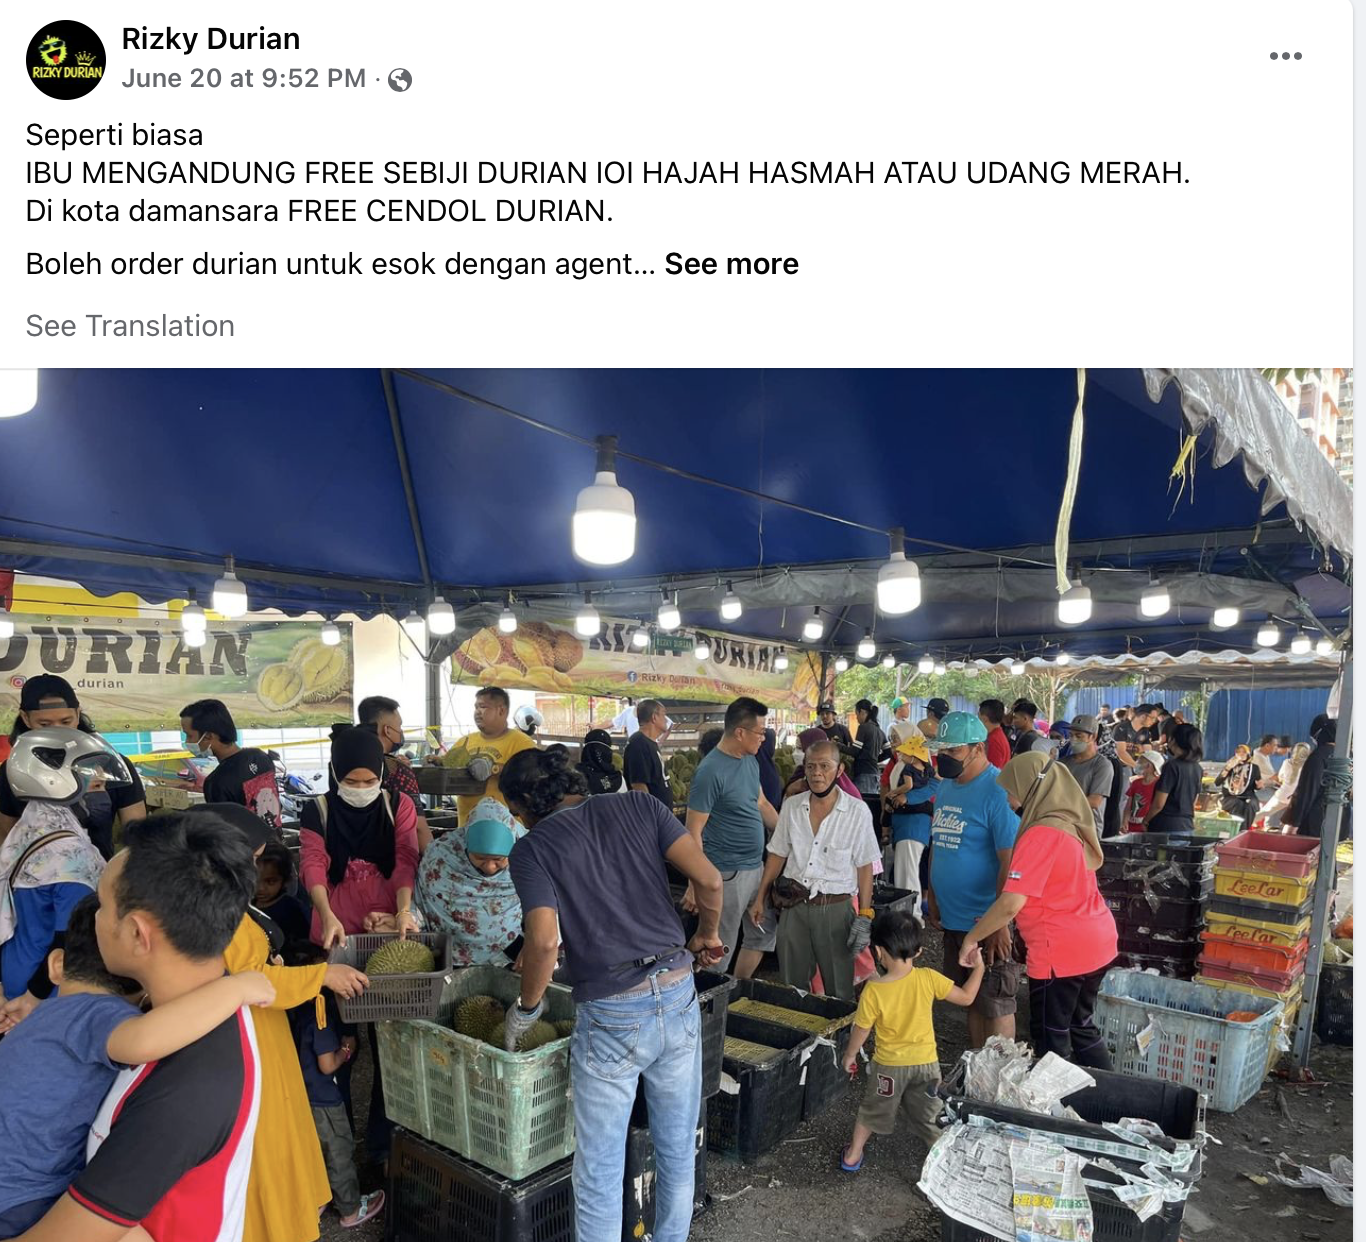 Pregnant women gets free durian from rizky durian